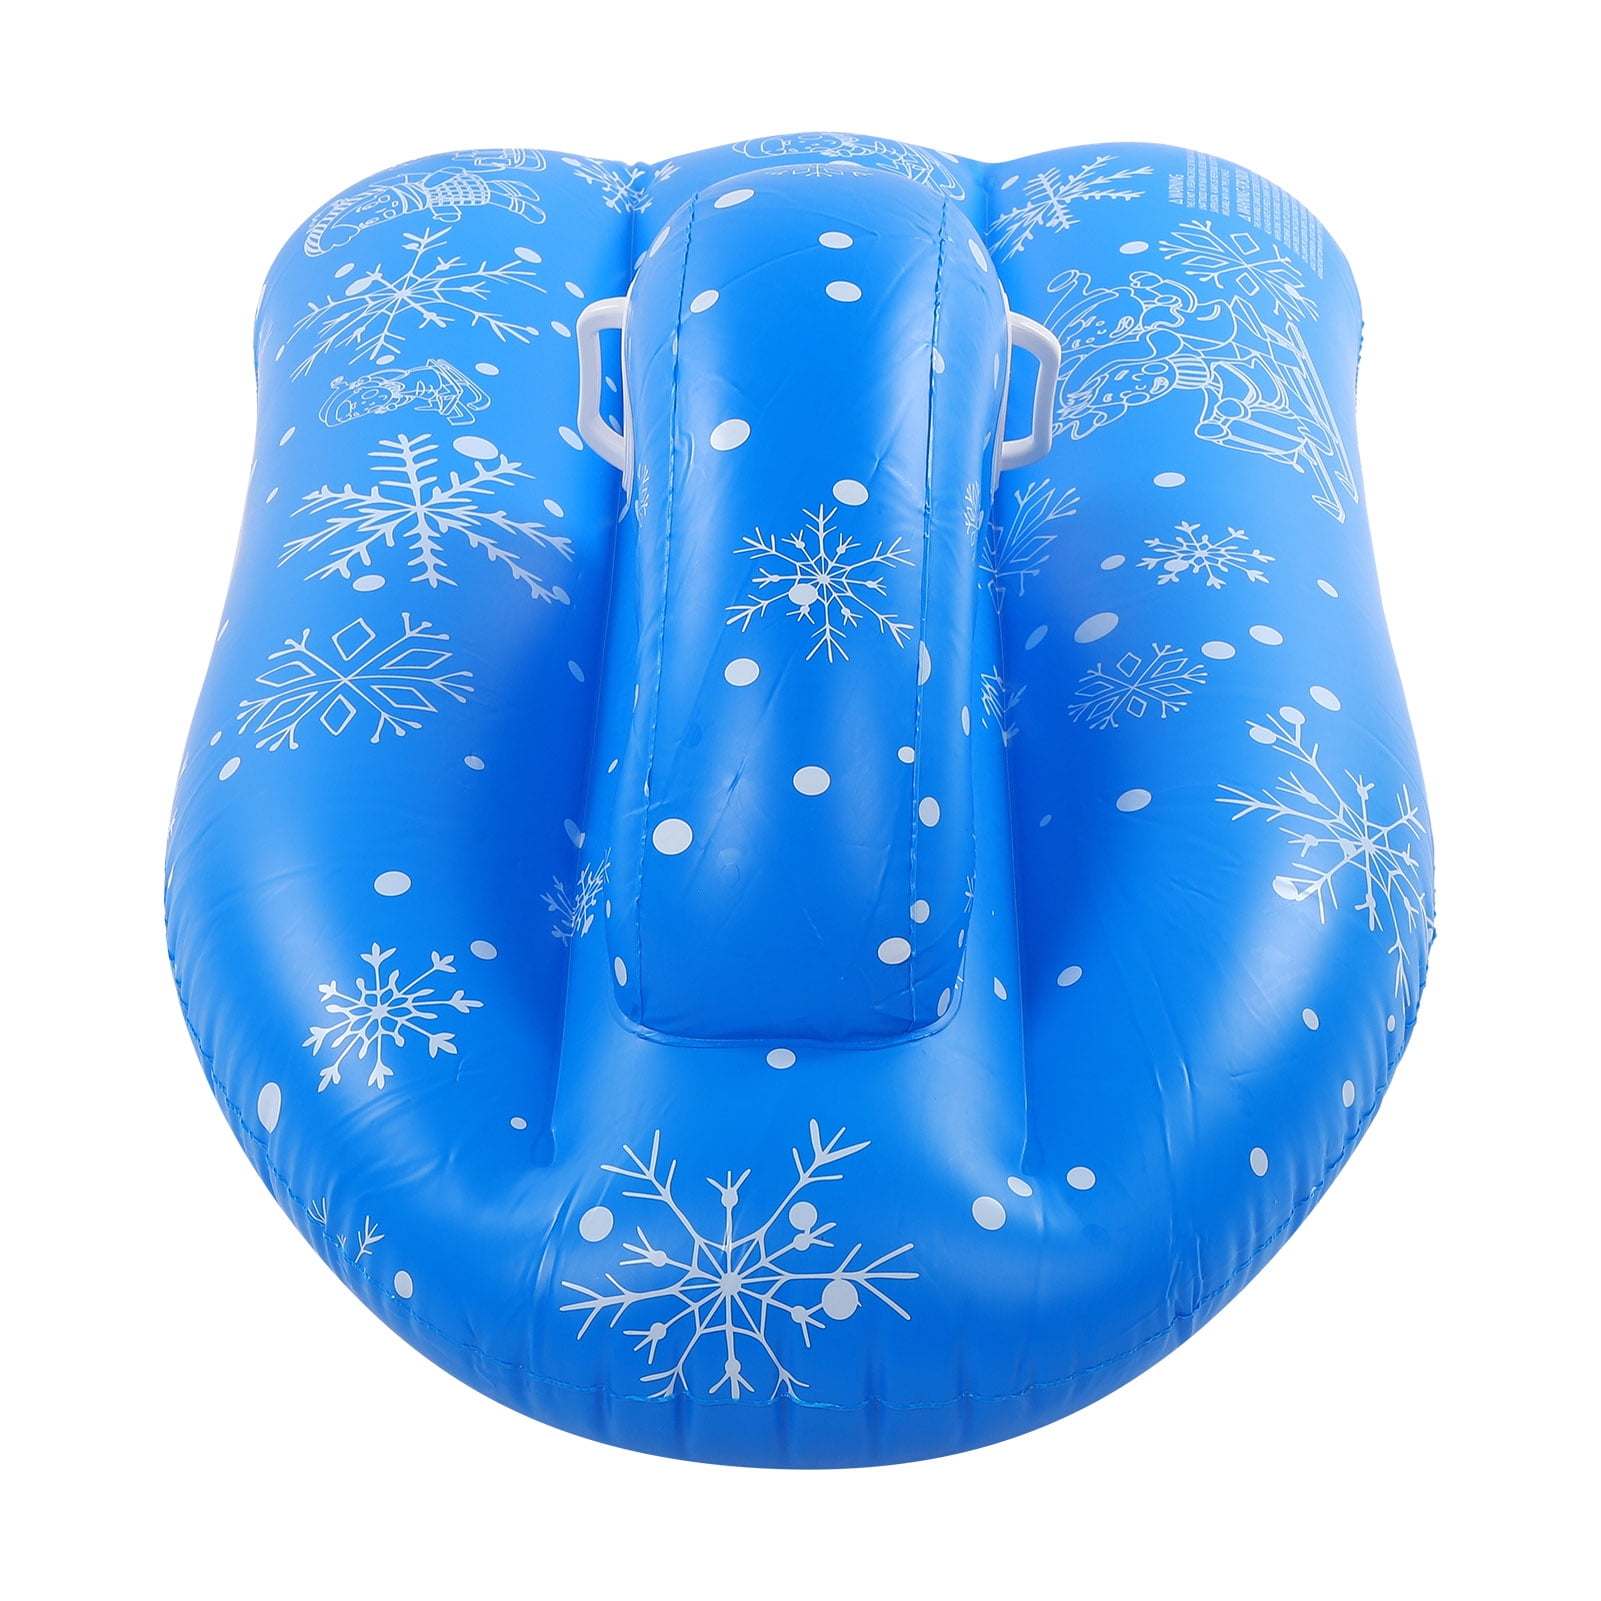 Inflation Children Skiing Car Inflatable Snowboard Inflate Snow Tube Raft Toy A 